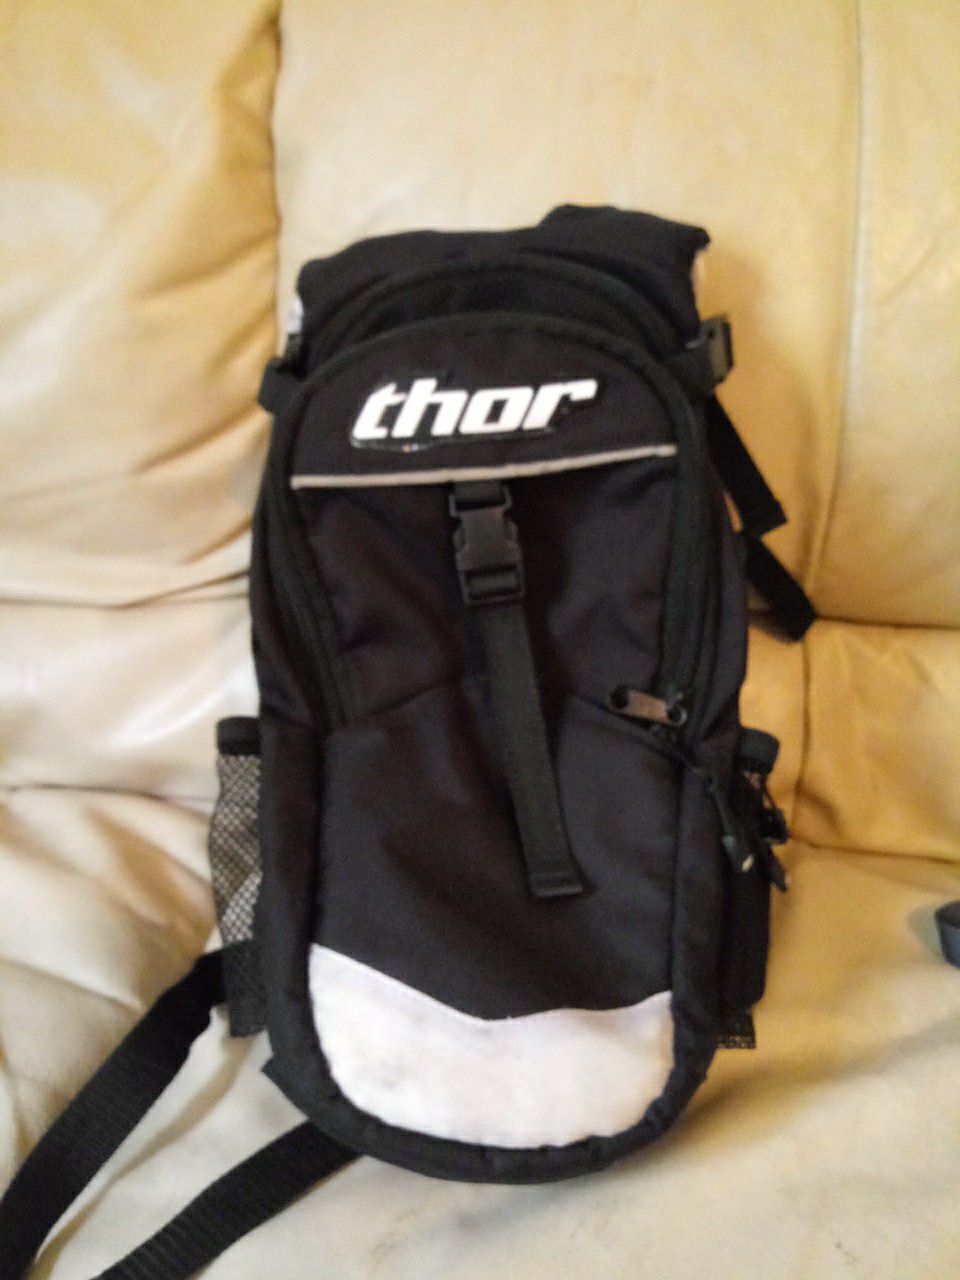 Thor sports backpack. Perfect for any outdoors events